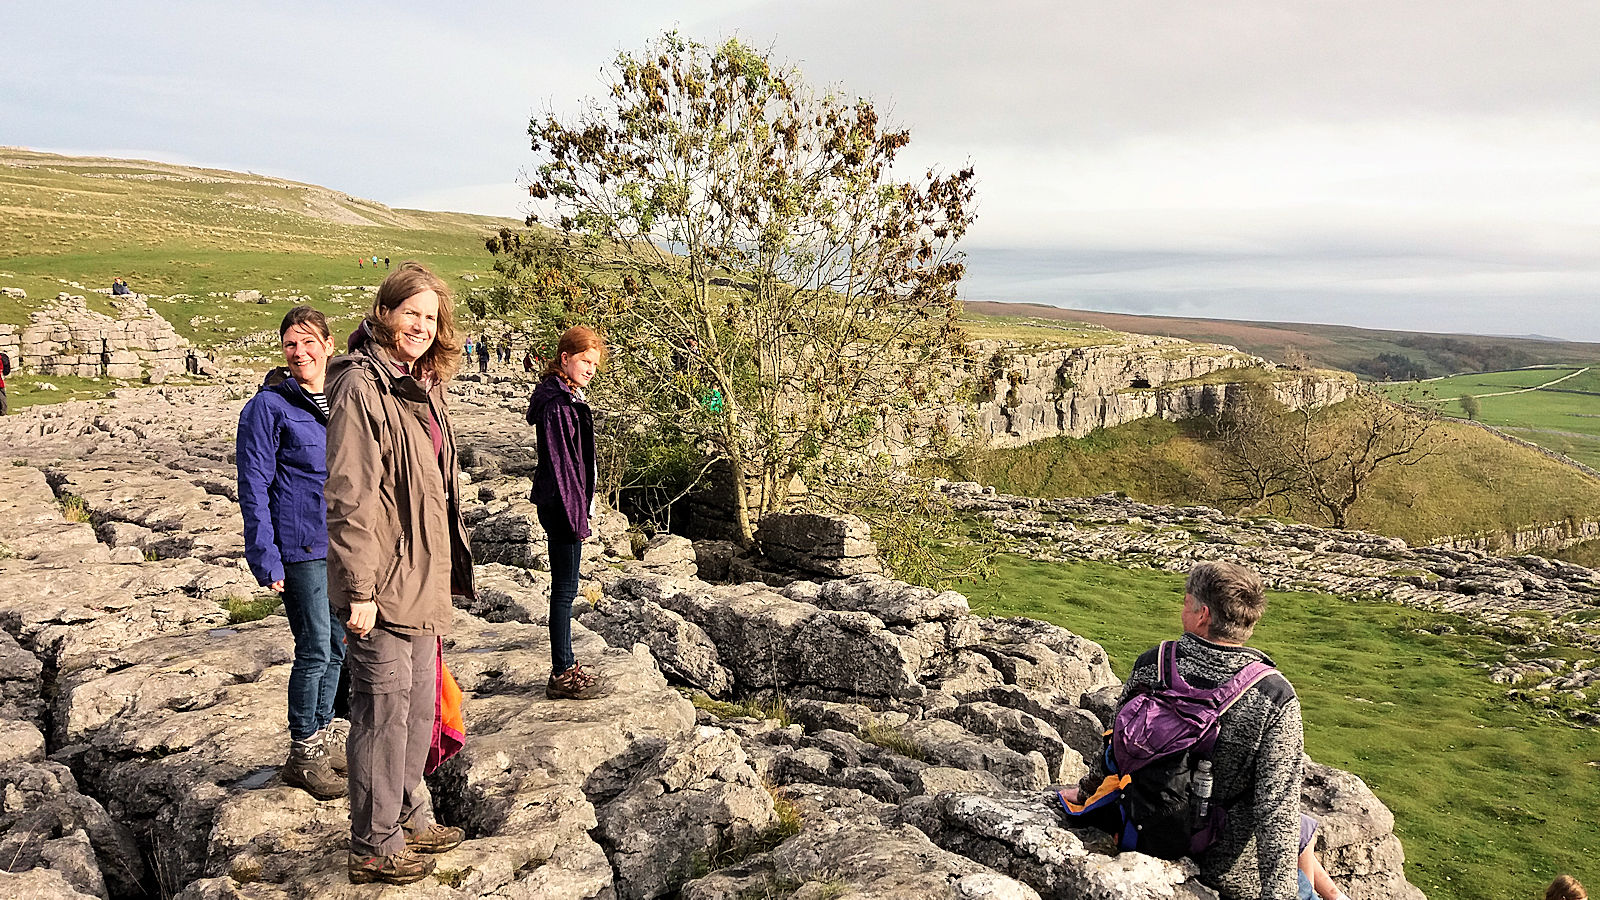 Easy to get to but spectacular, Malham Cove